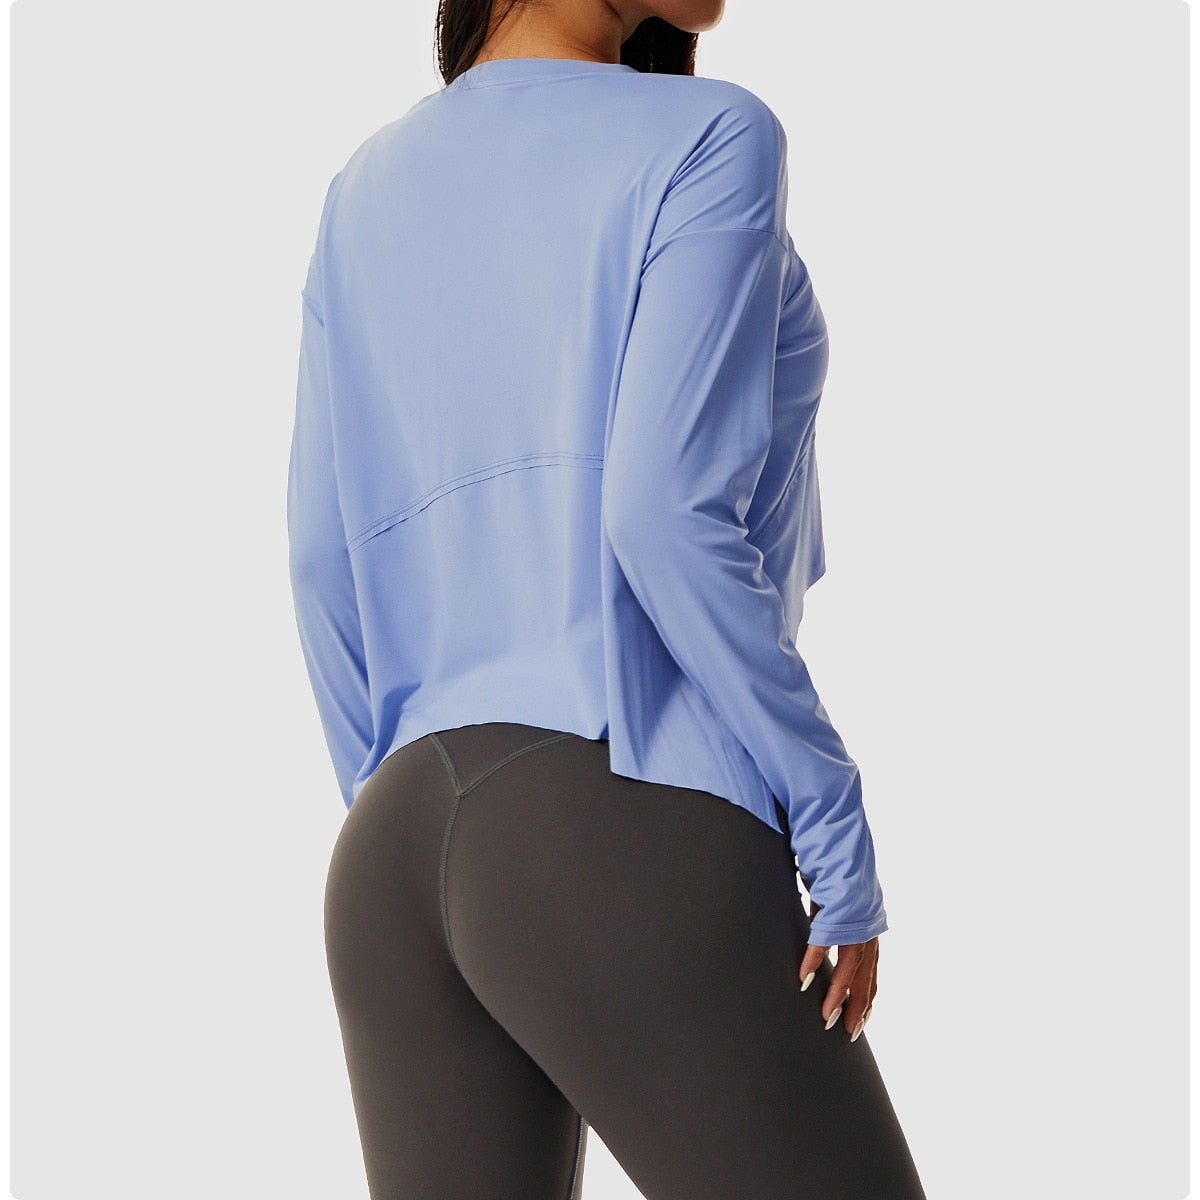 Women's Sport Tops Workout Crop Sweatshirt Long Sleeve High Elastic Sports Cycling Running Training Loose Fitness Sport Blouse The Clothing Company Sydney